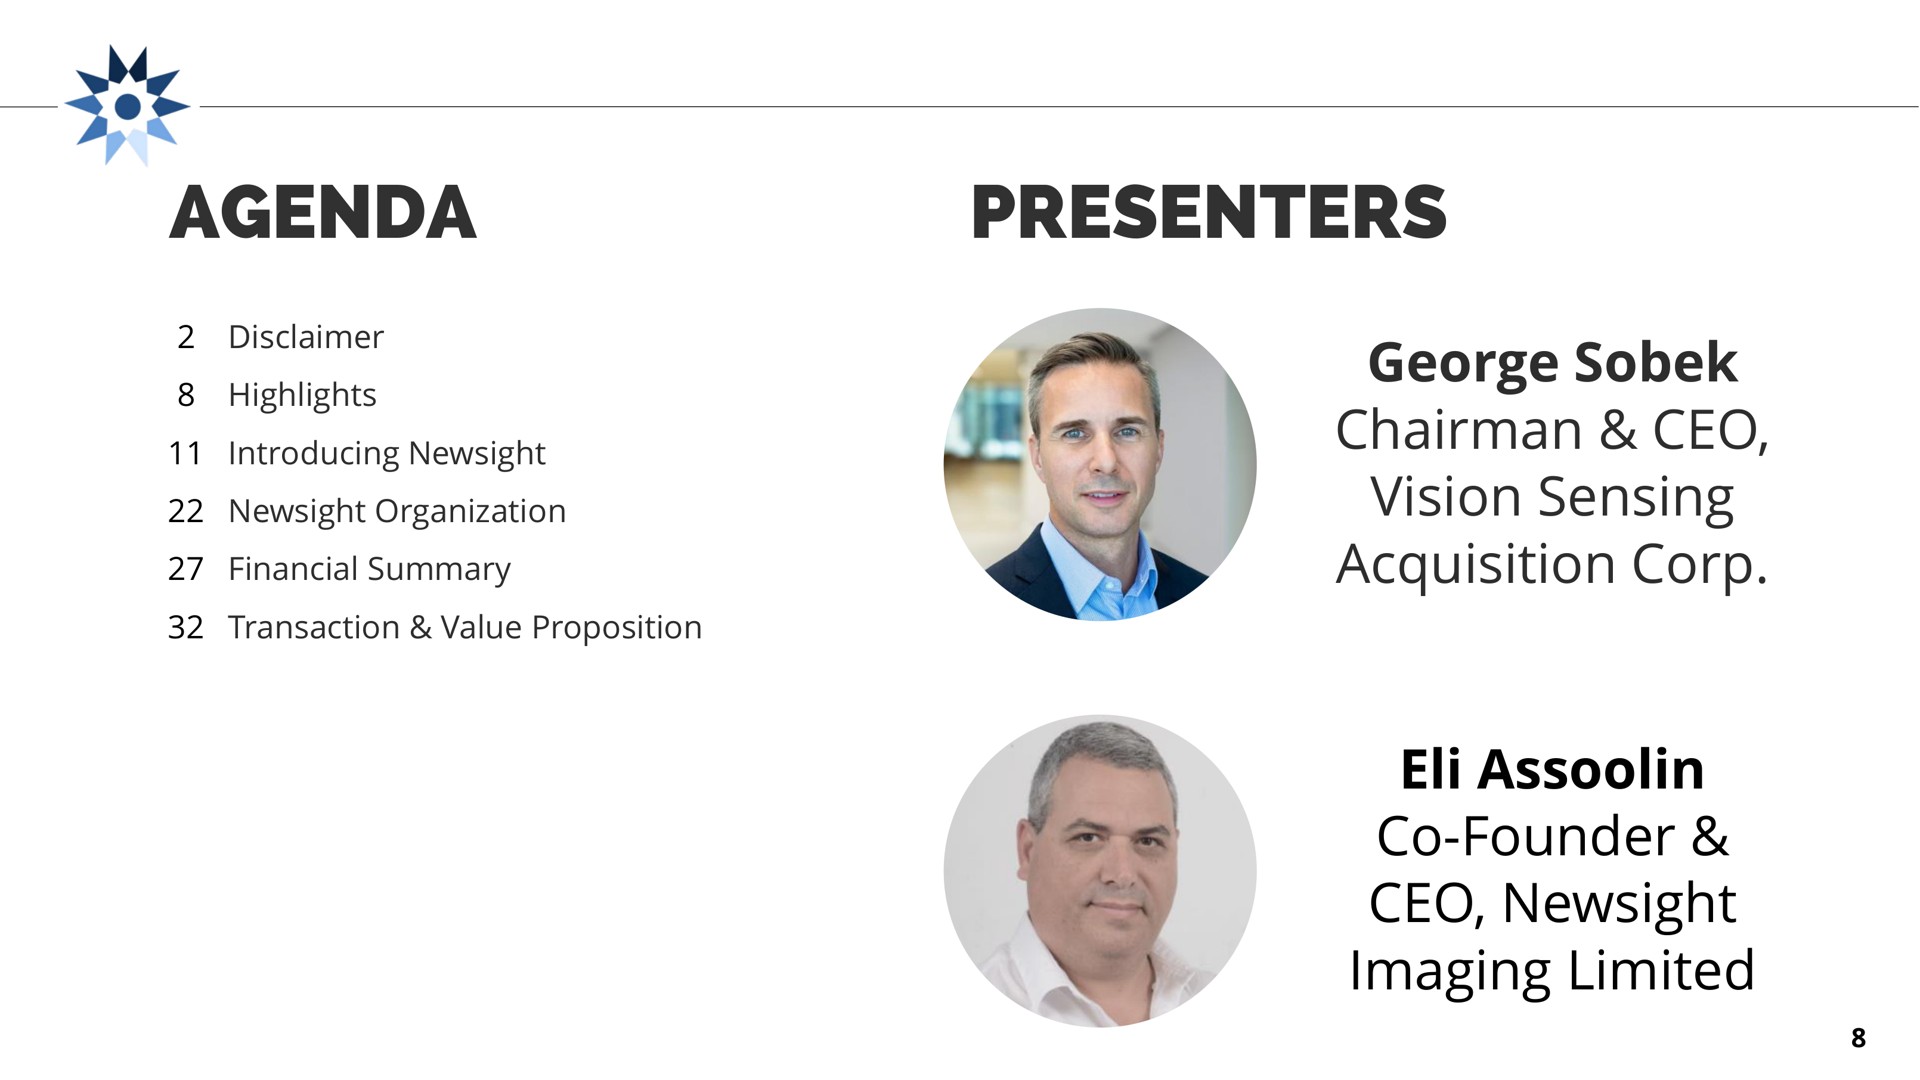 agenda disclaimer highlights introducing organization financial summary transaction value proposition presenters chairman vision sensing acquisition corp founder imaging limited | Newsight Imaging